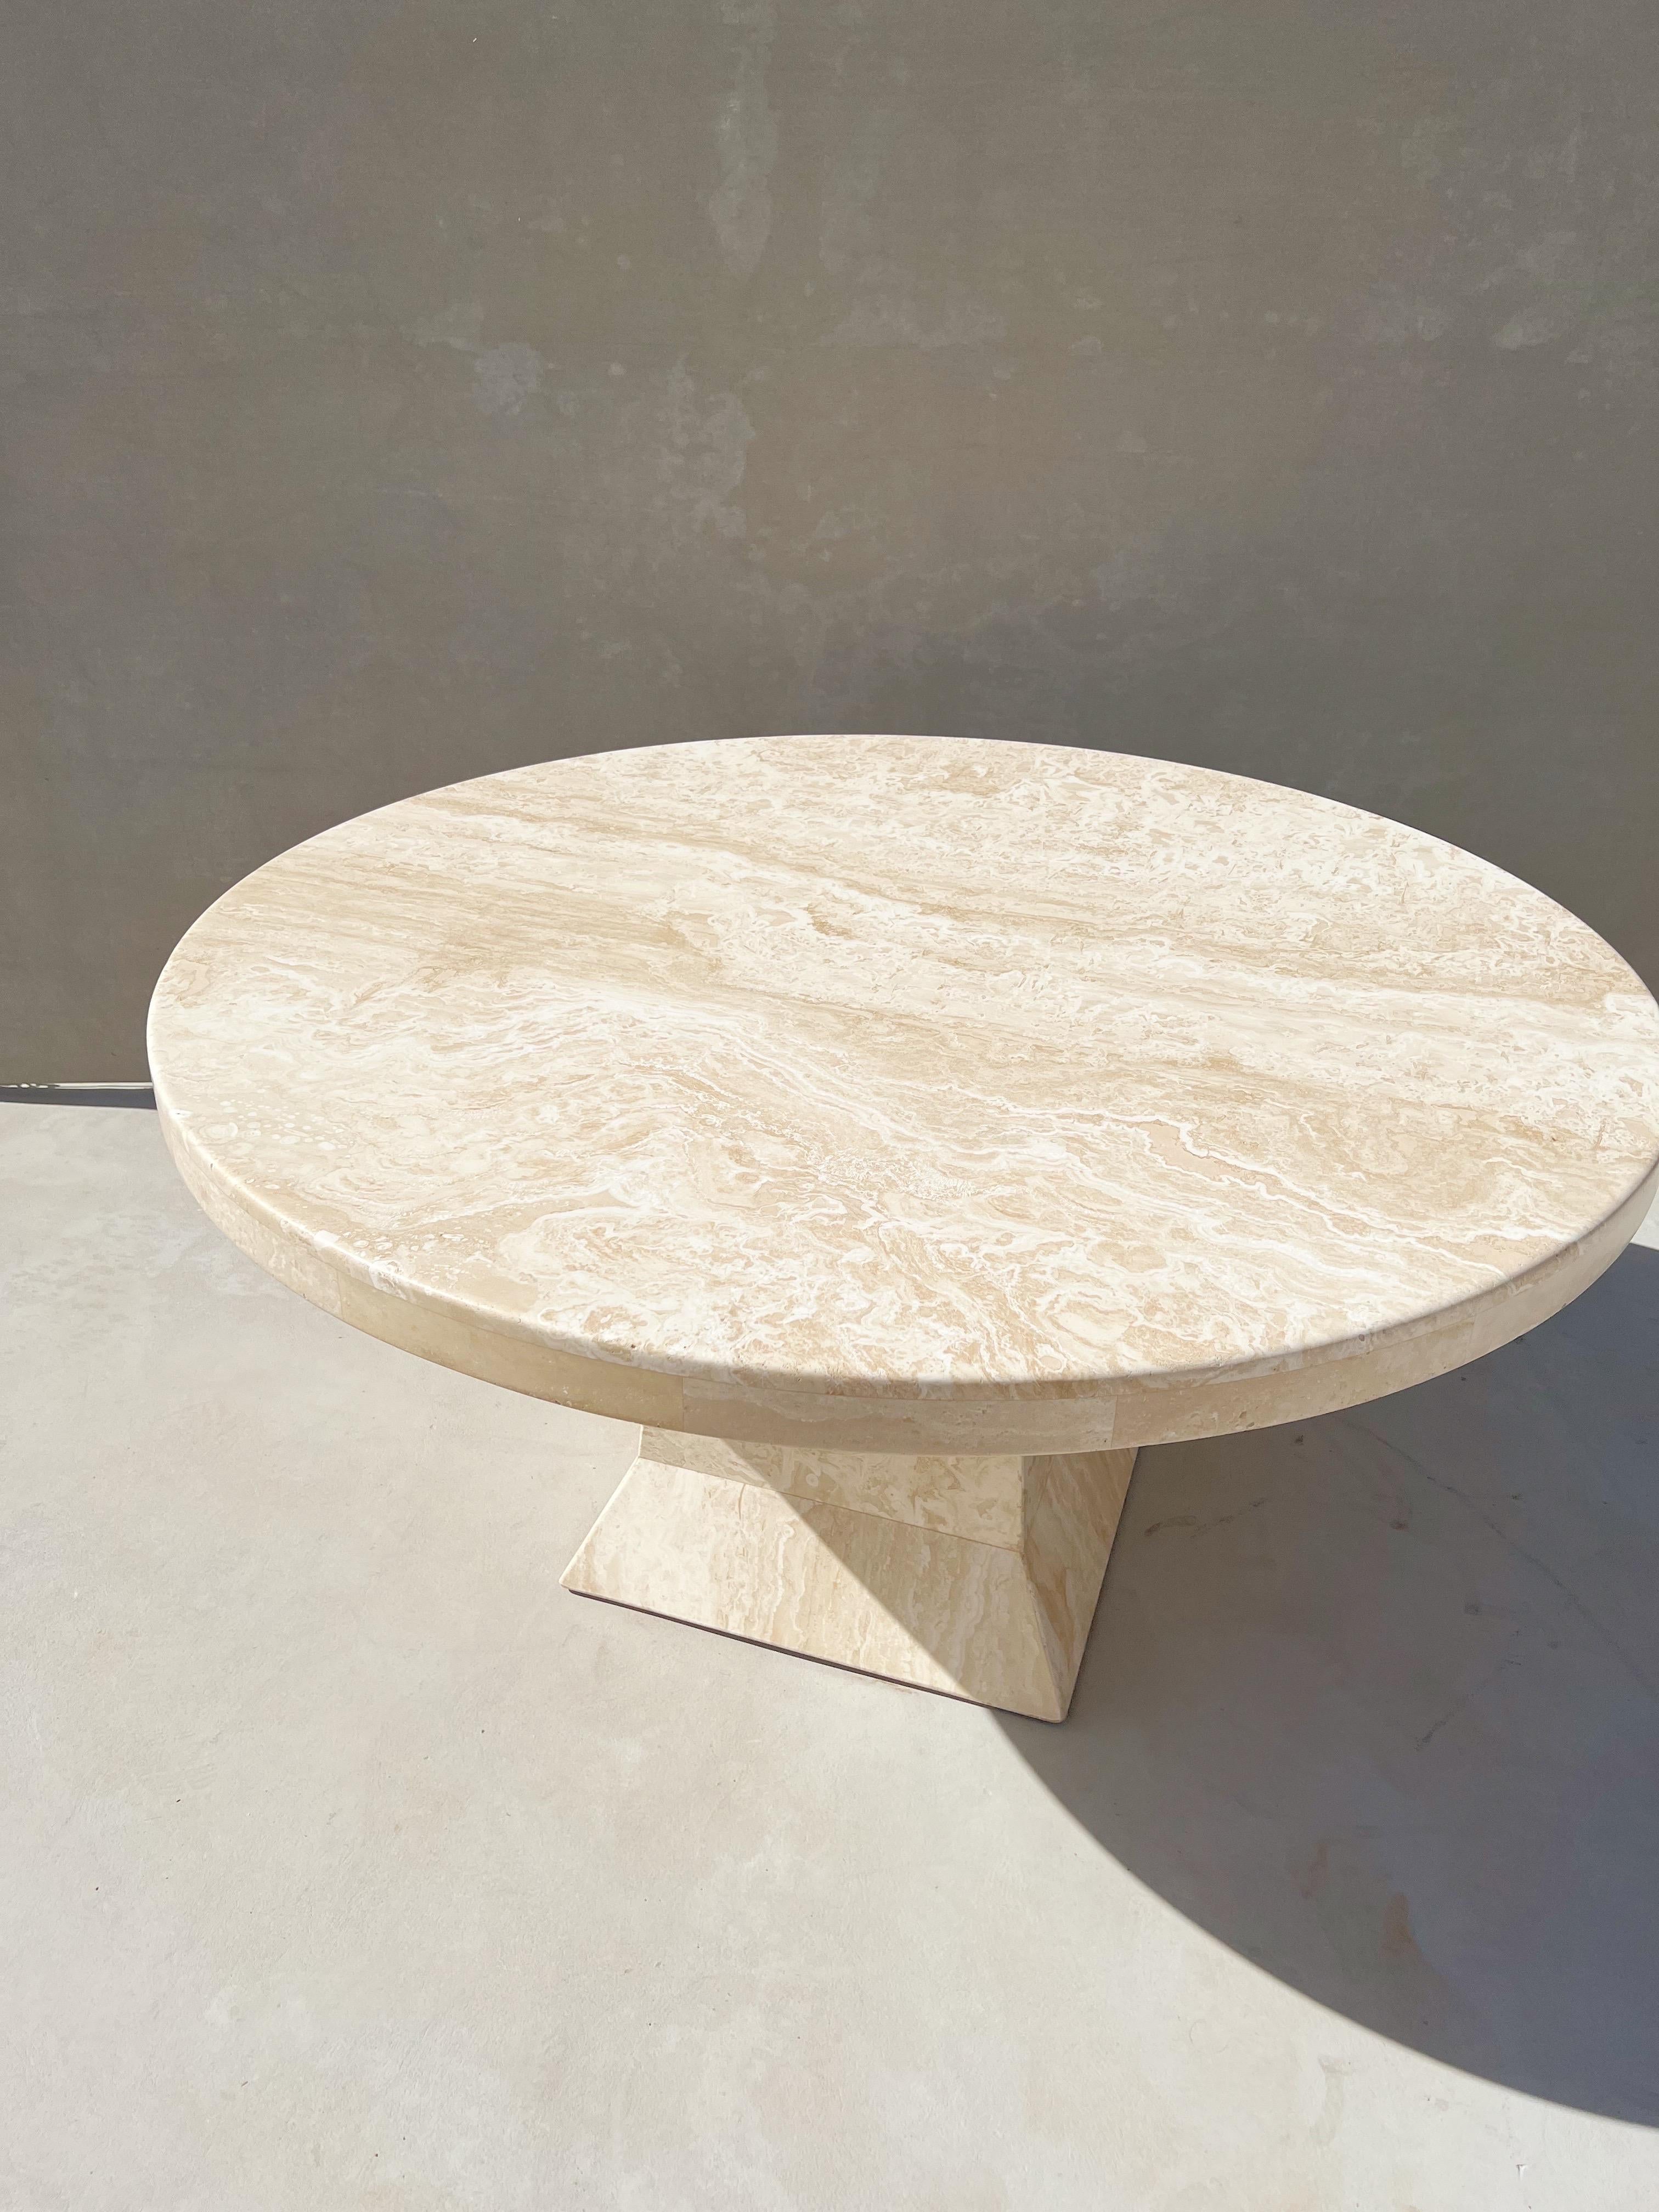 Vintage Modern Italian Travertine Round Dining Table with a Sculptural Base 4